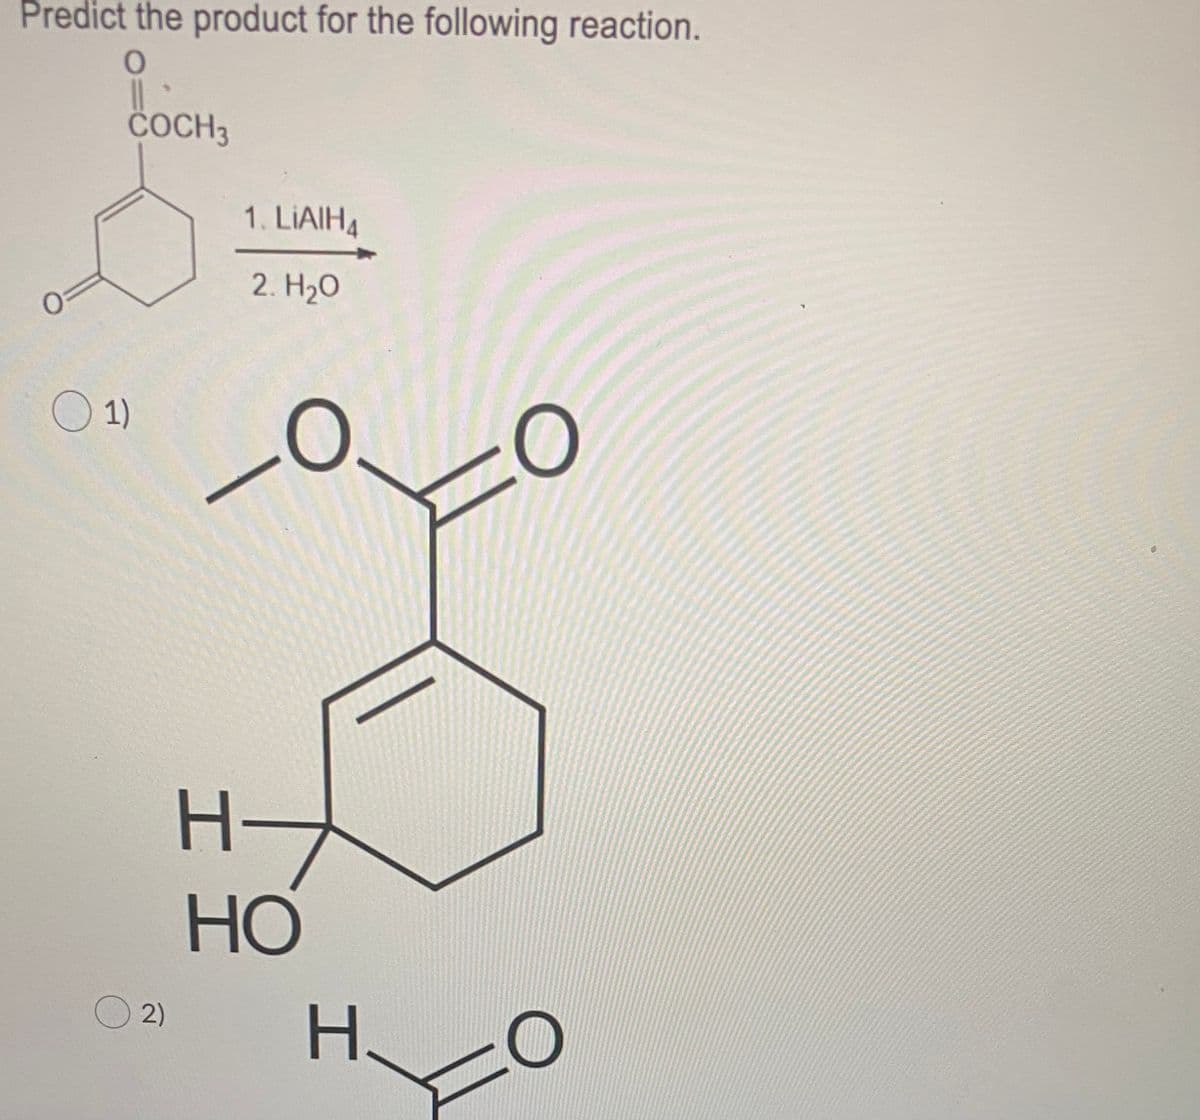 Predict the product for the following reaction.
COCH3
1. LIAIH4
2. Hао
O1)
C
H-
HO
2)
H.
